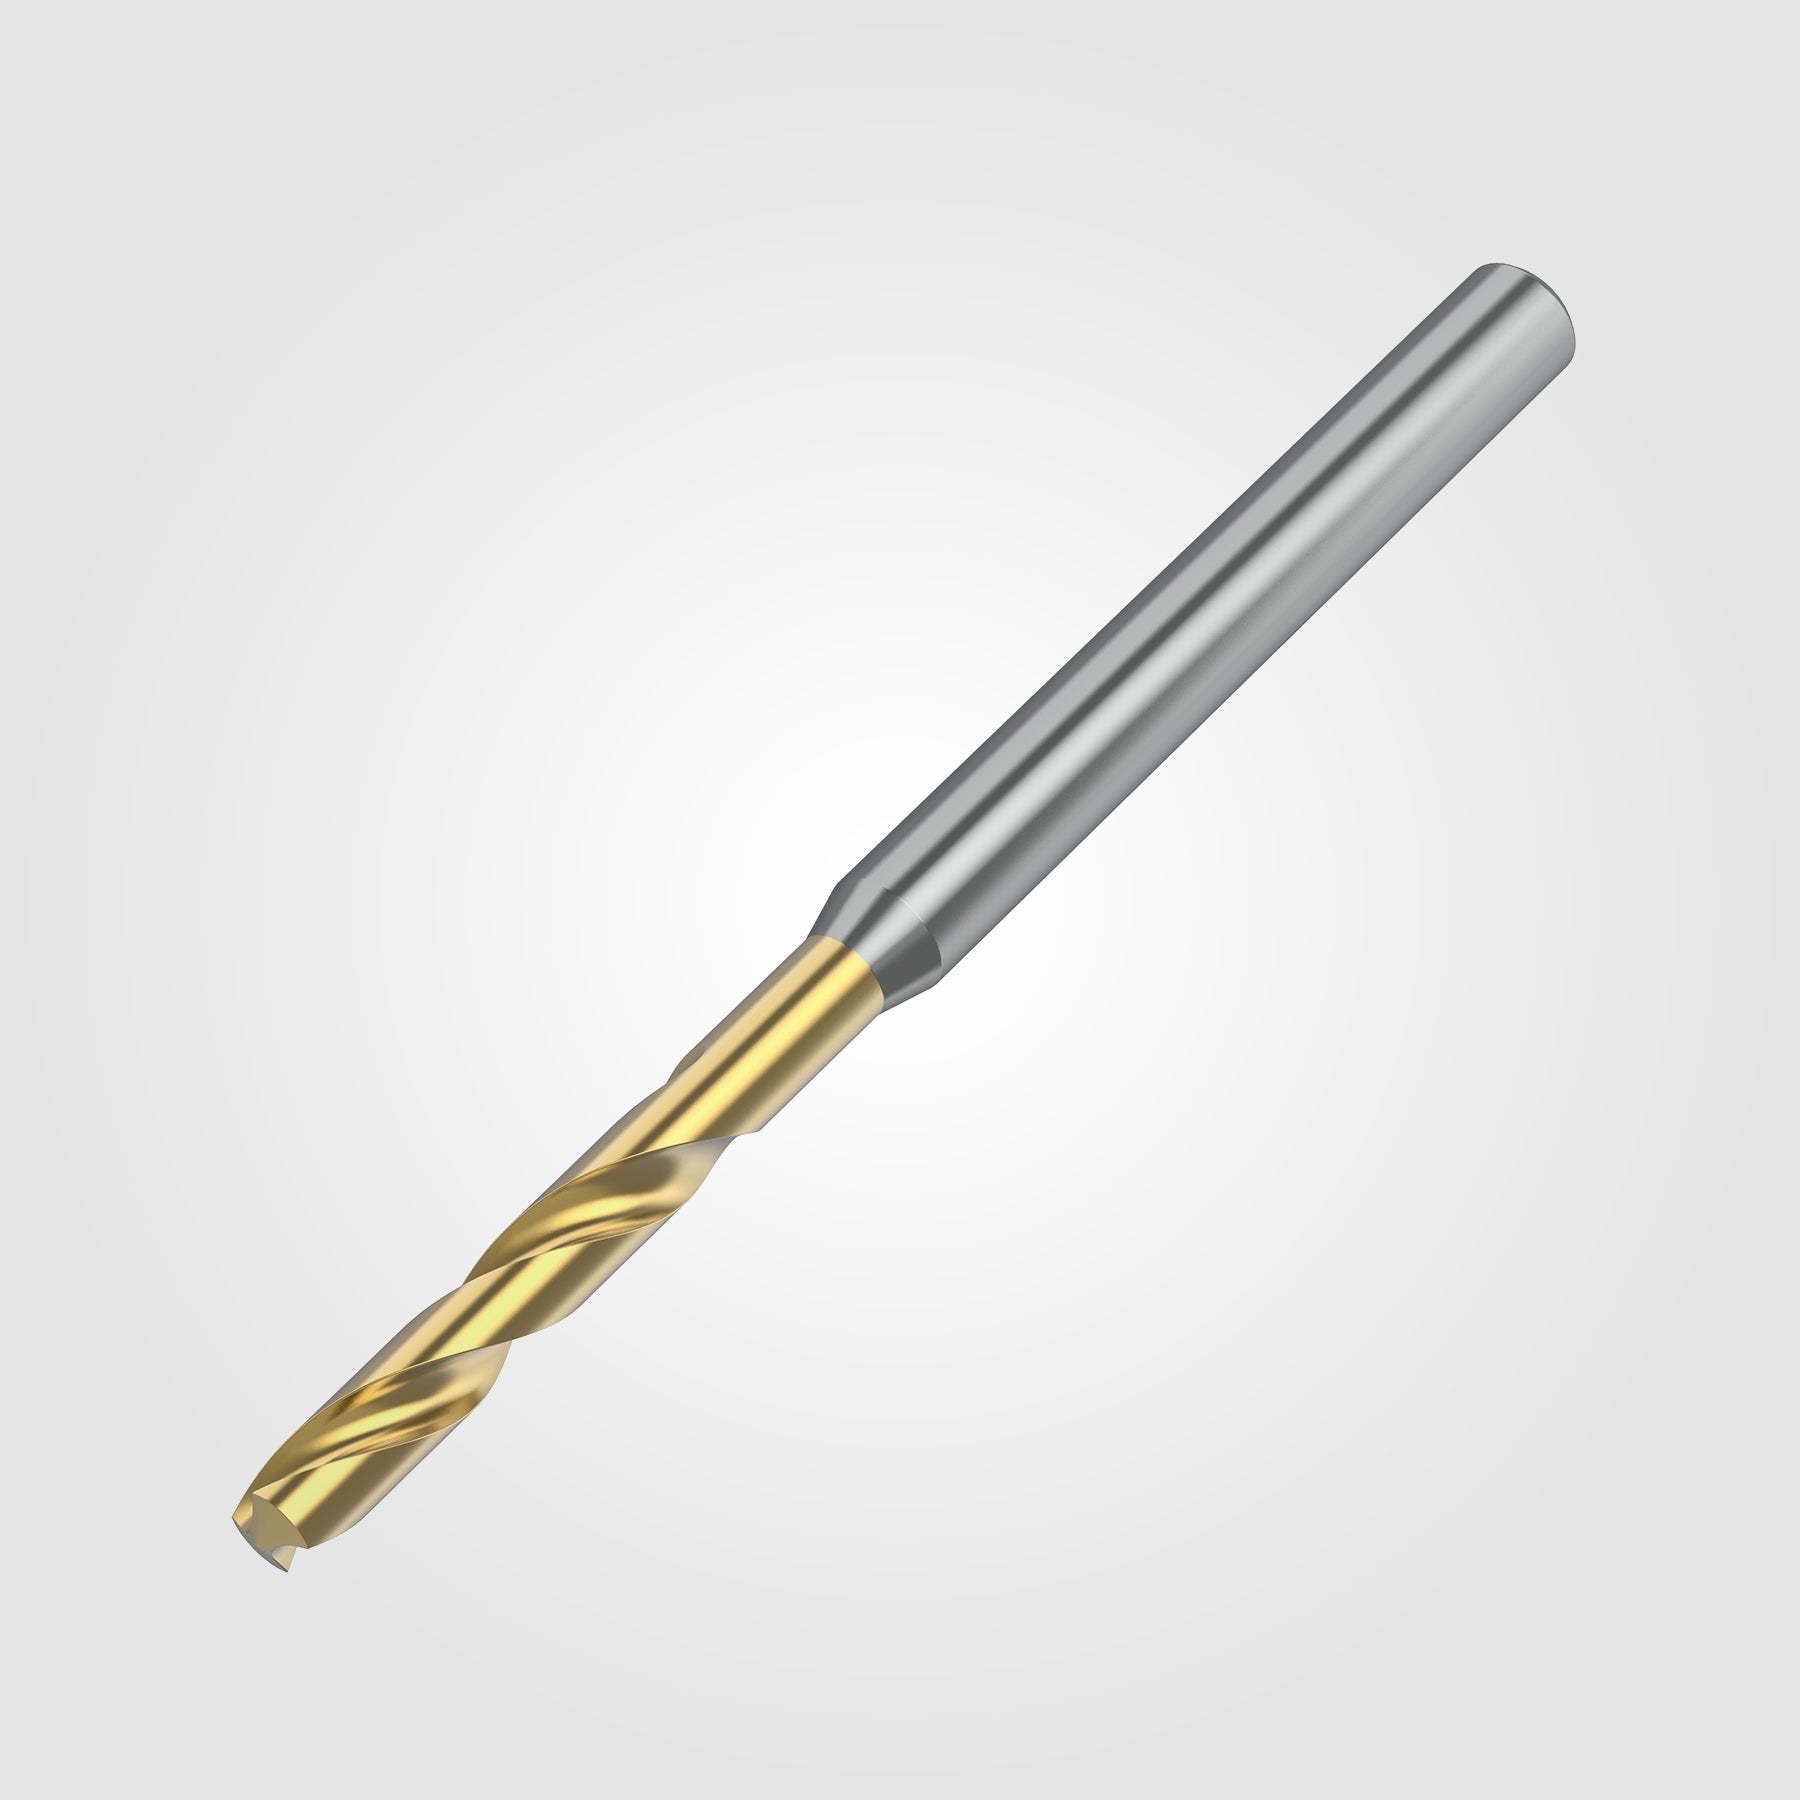 GOdrill (THROUGH COOLANT) | 3.175mm / .1250" / 5xD | SOLID CARBIDE DRILL | 4149129